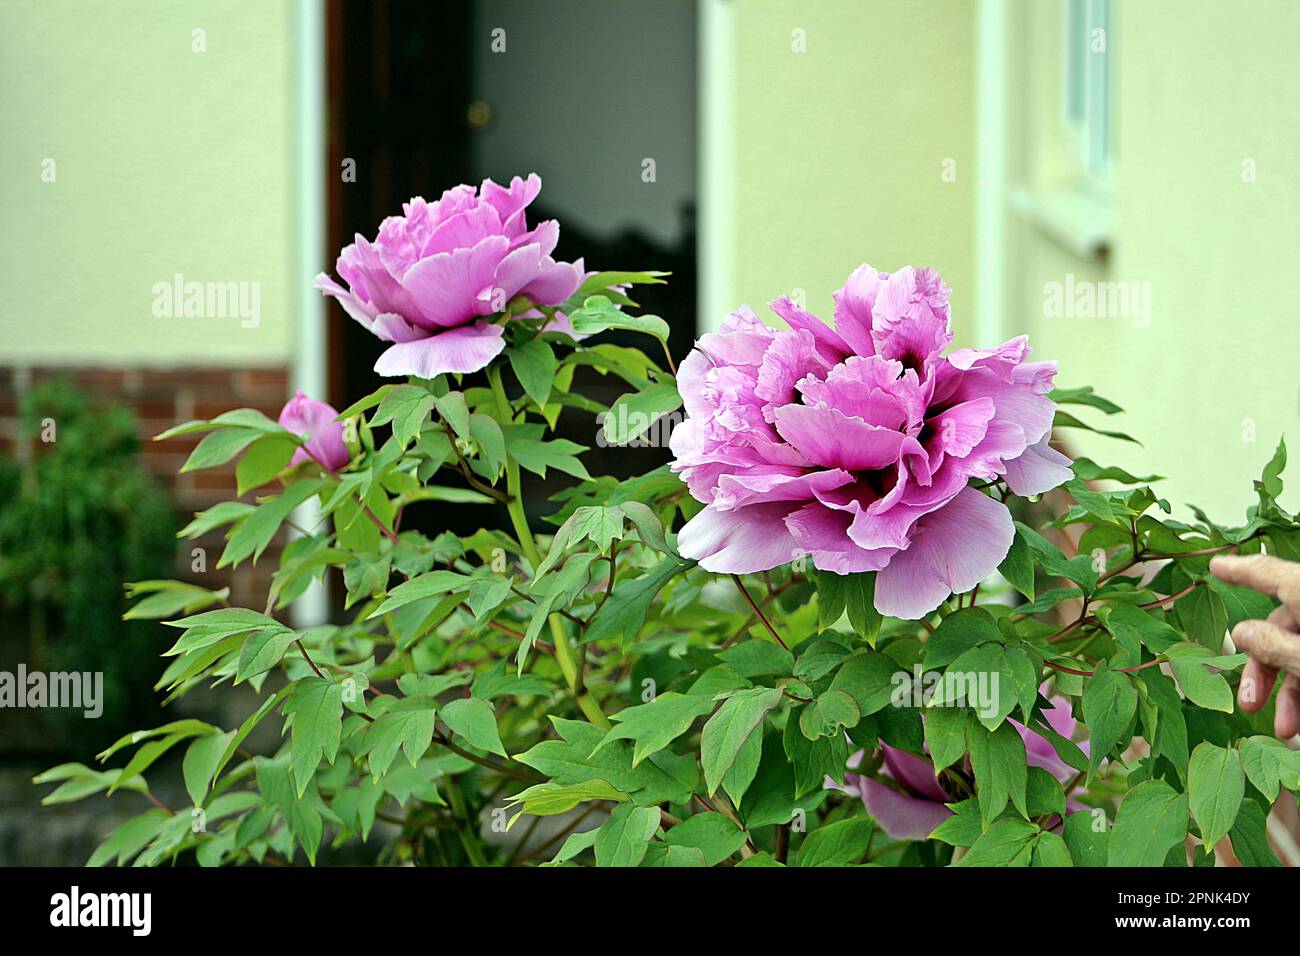 group of bright pink double peony or paeony (genus Paeonia) with a yellow wall in the background Stock Photo